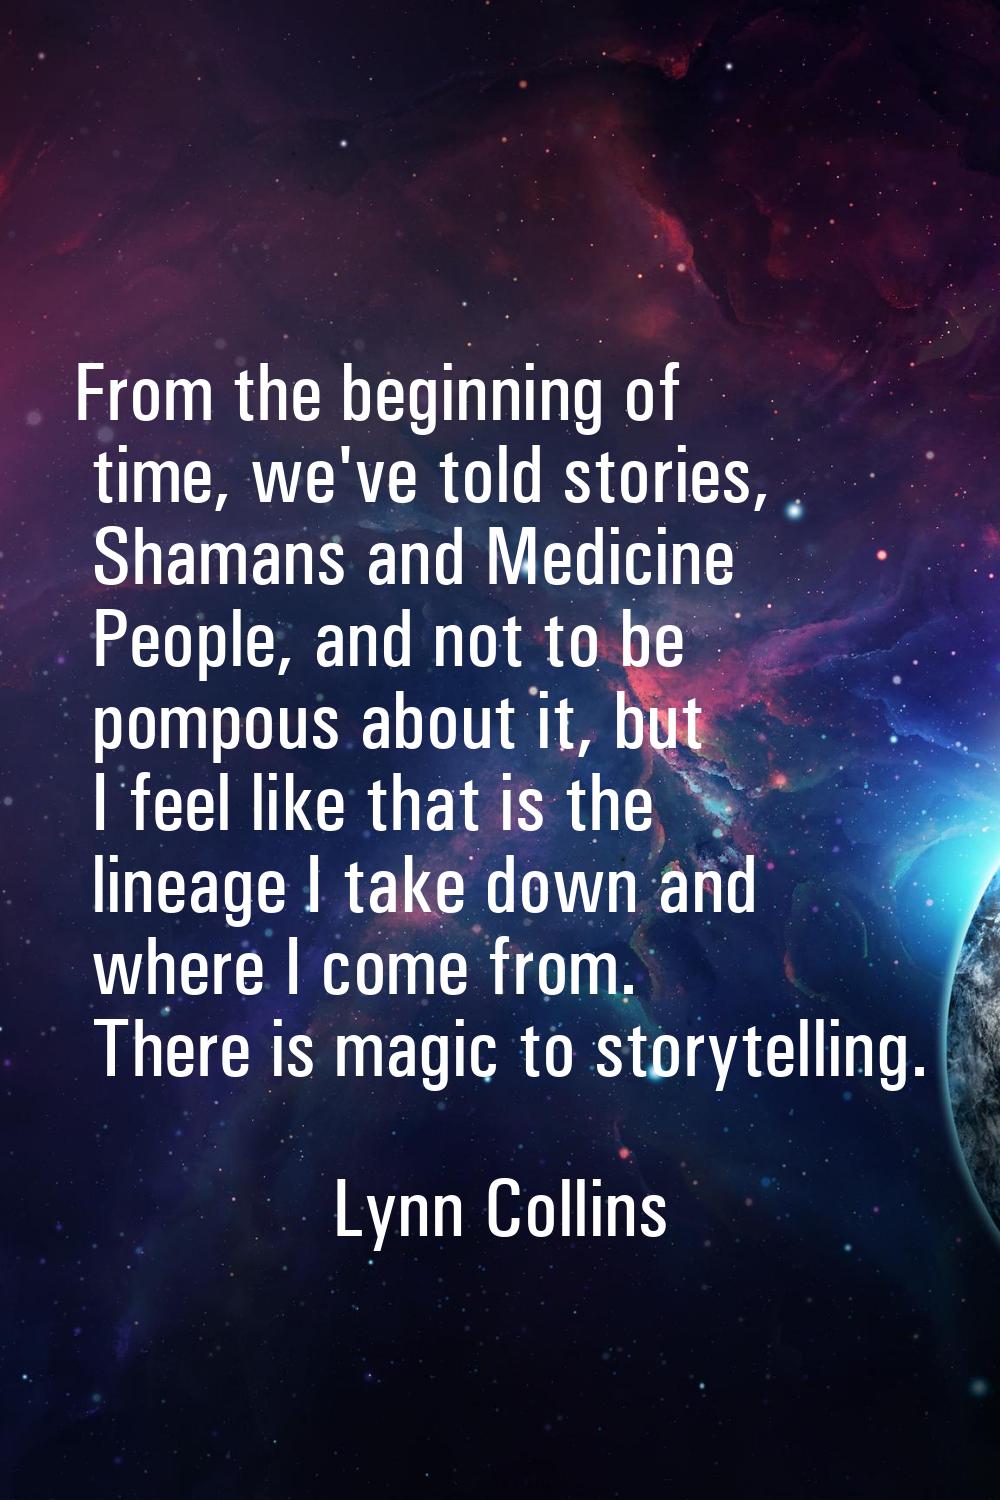 From the beginning of time, we've told stories, Shamans and Medicine People, and not to be pompous 